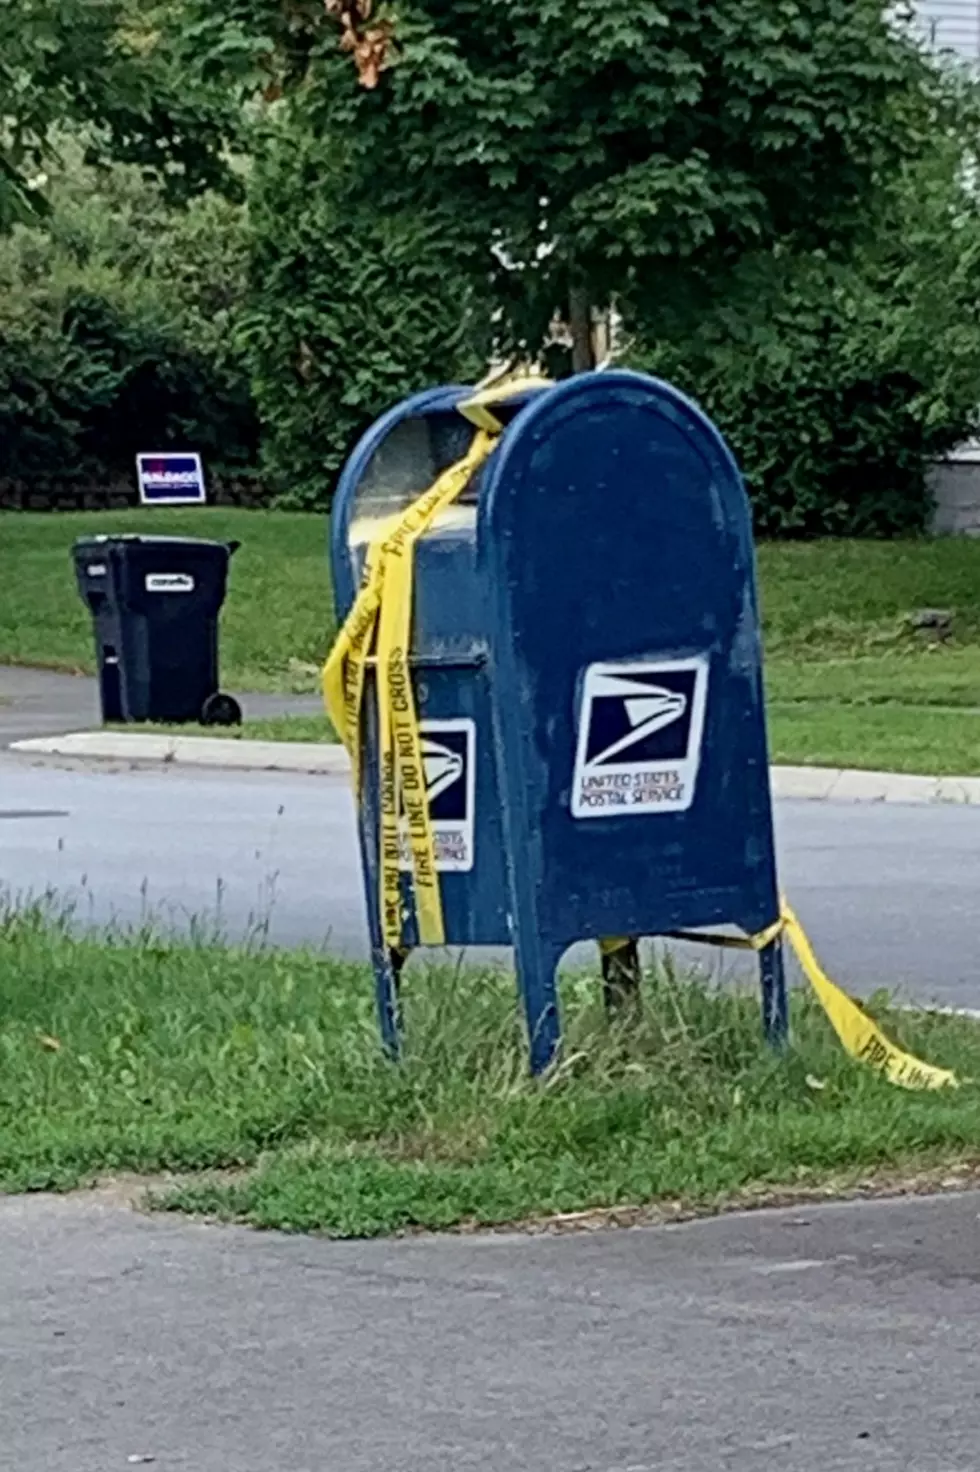 Fireworks And Mailboxes Don't Mix